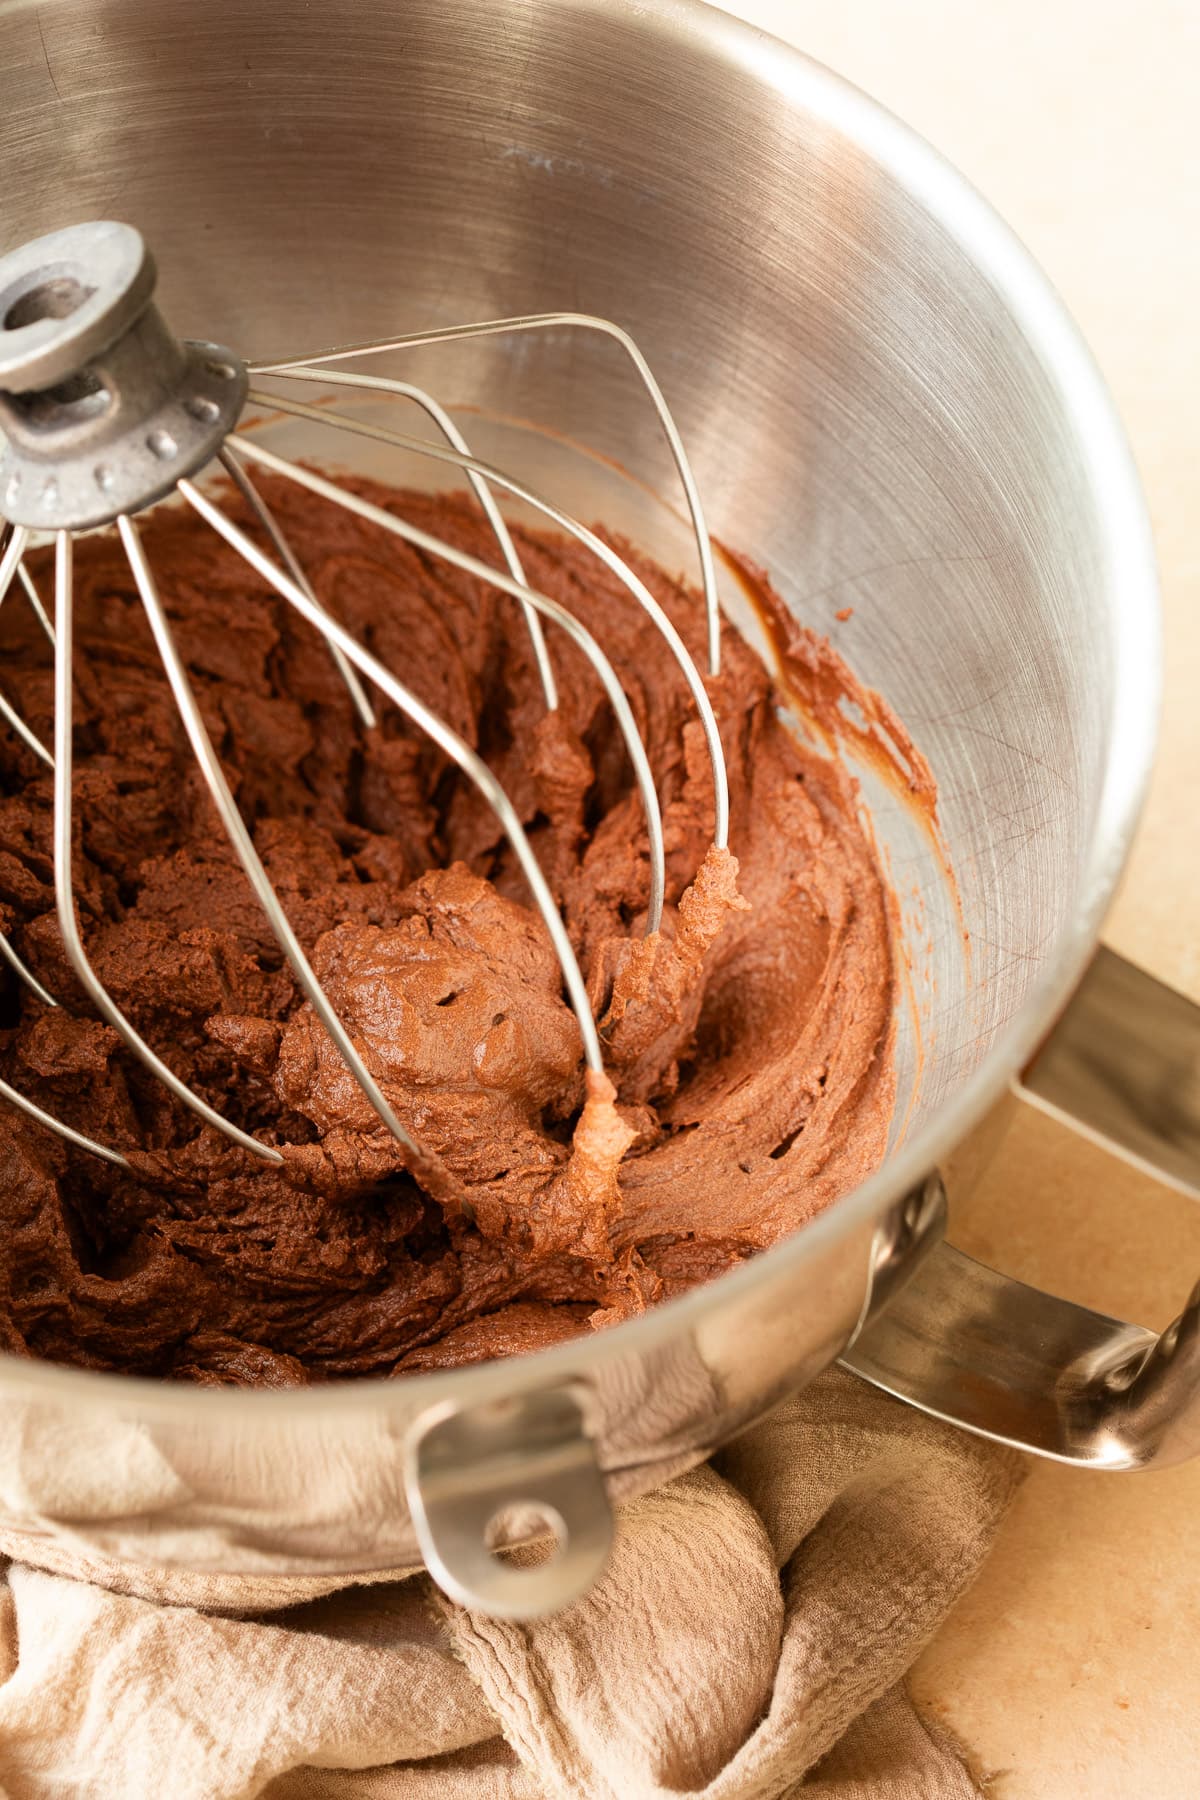 Chocolate ganache being whipped in a stand mixer with a wire whip.